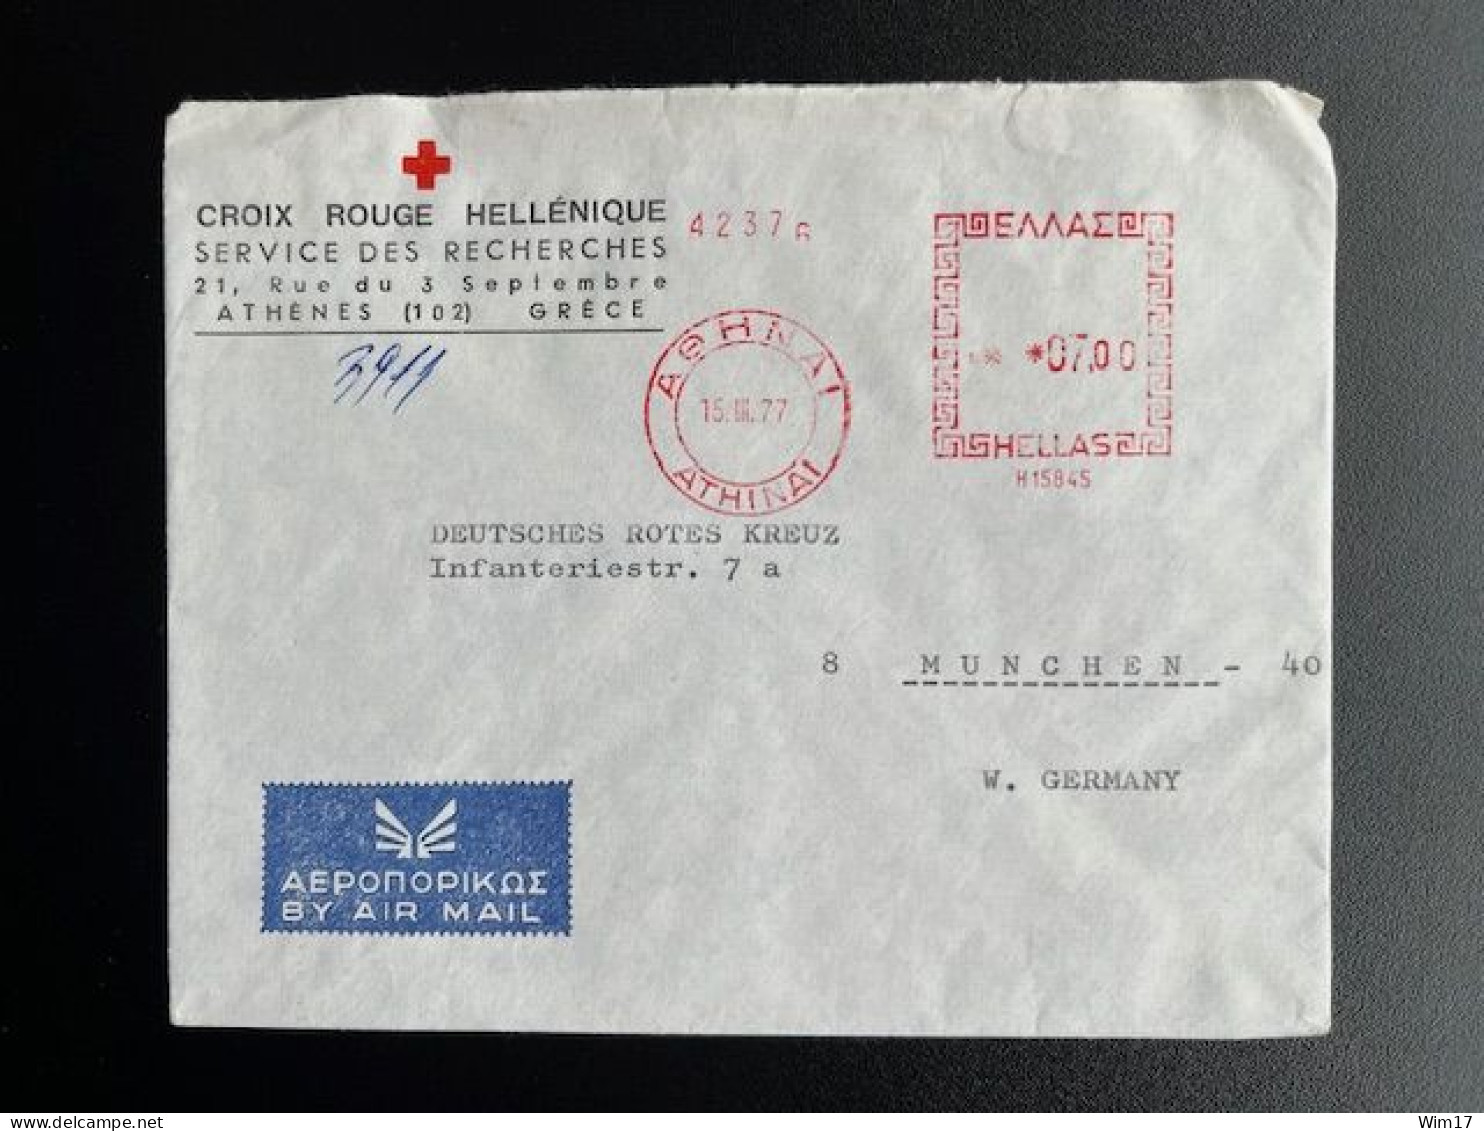 GREECE 1977 LETTER ATHENS TO MUNICH 15-03-1977 GRIEKENLAND RED CROSS - Covers & Documents